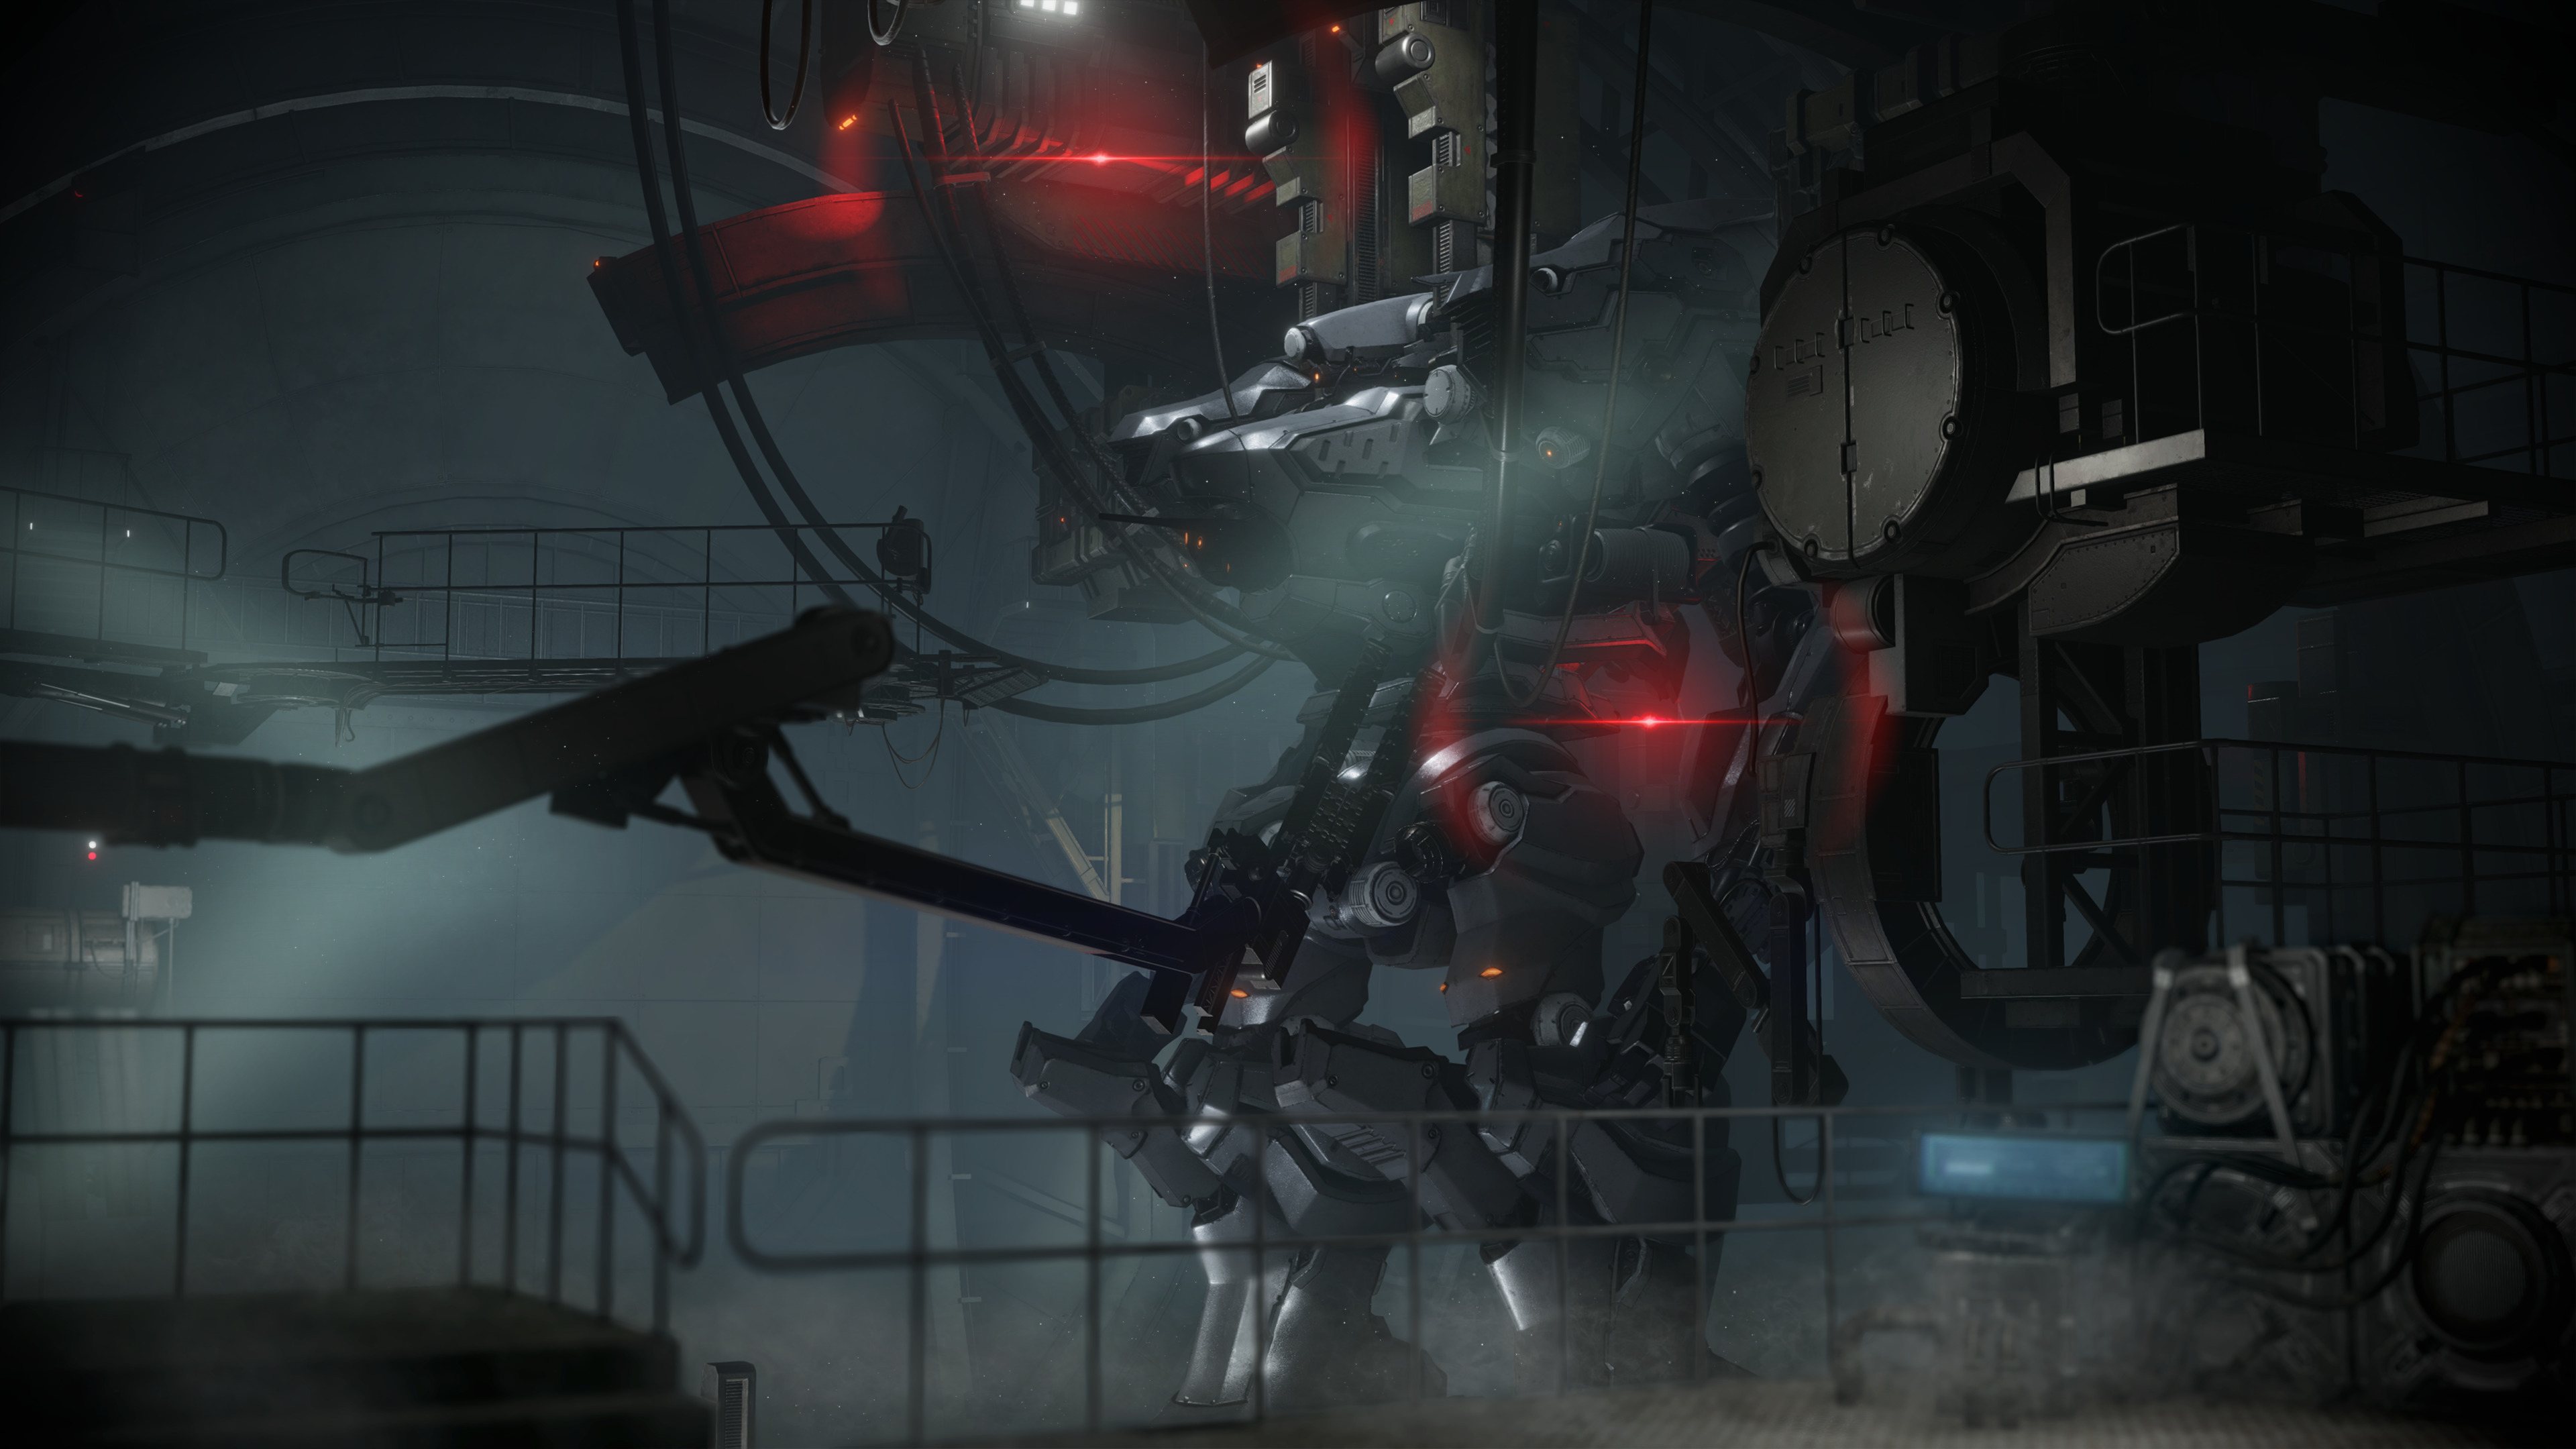 Video Game Armored Core VI: Fires of Rubicon HD Wallpaper | Background Image